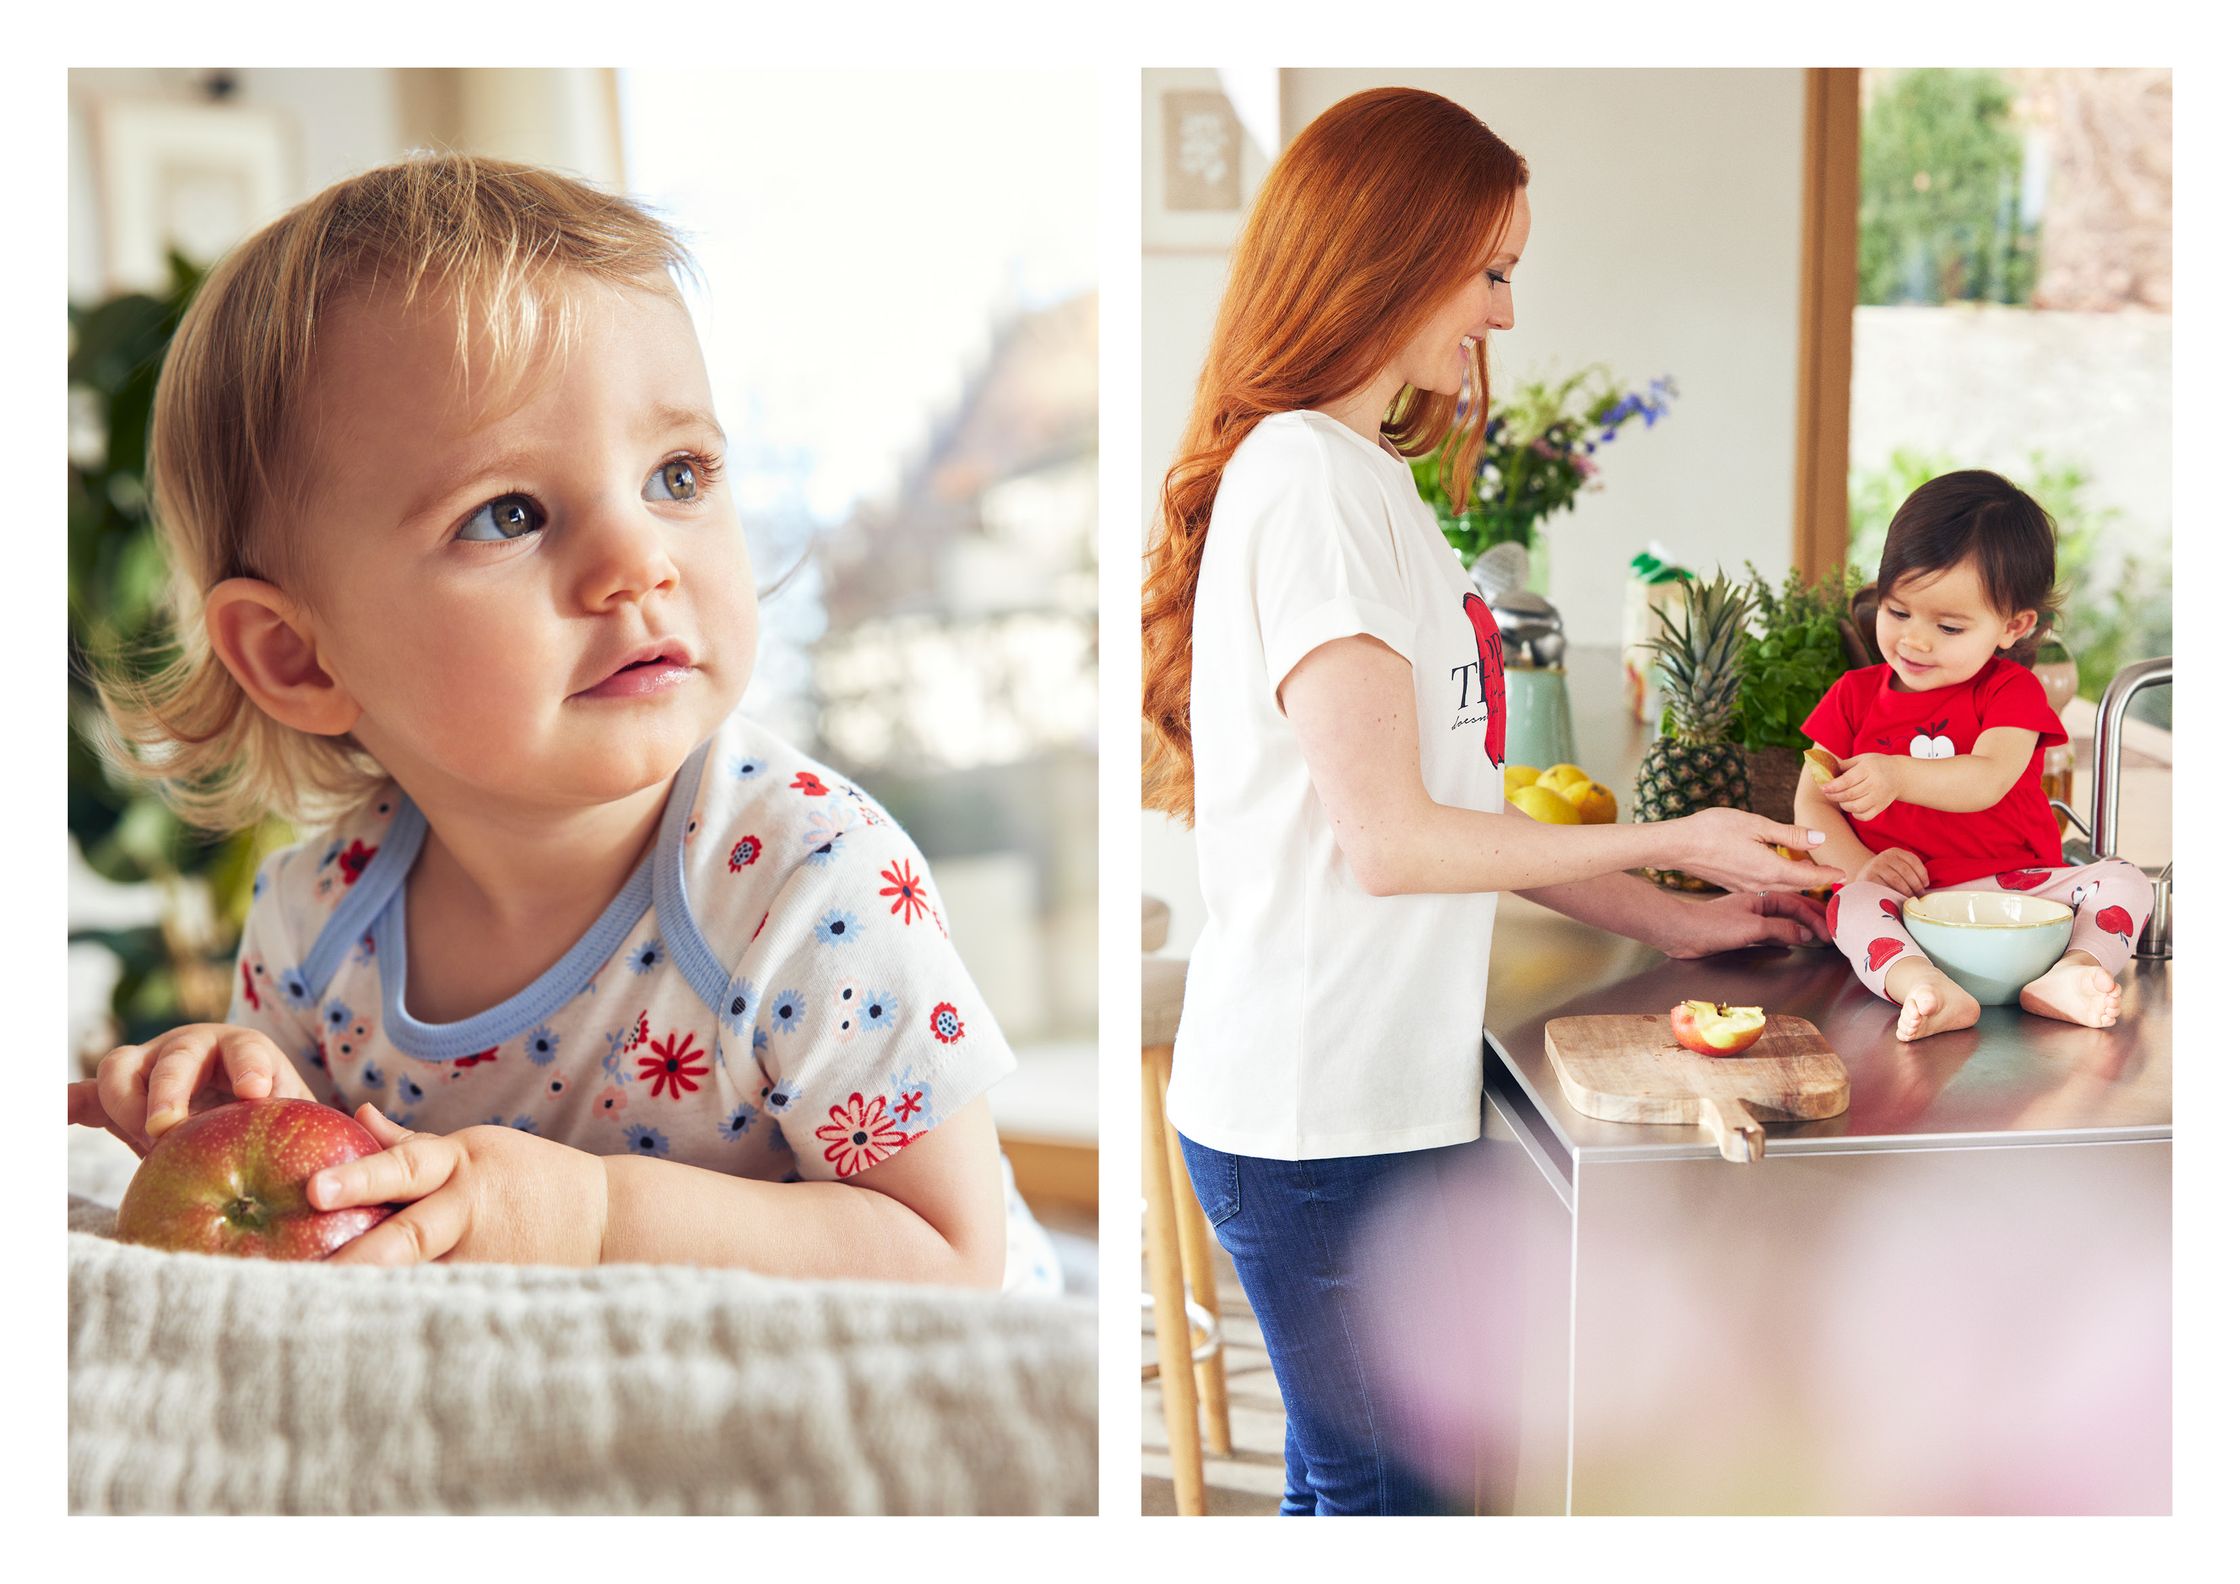 two pictures of a woman and a baby in the kitchen